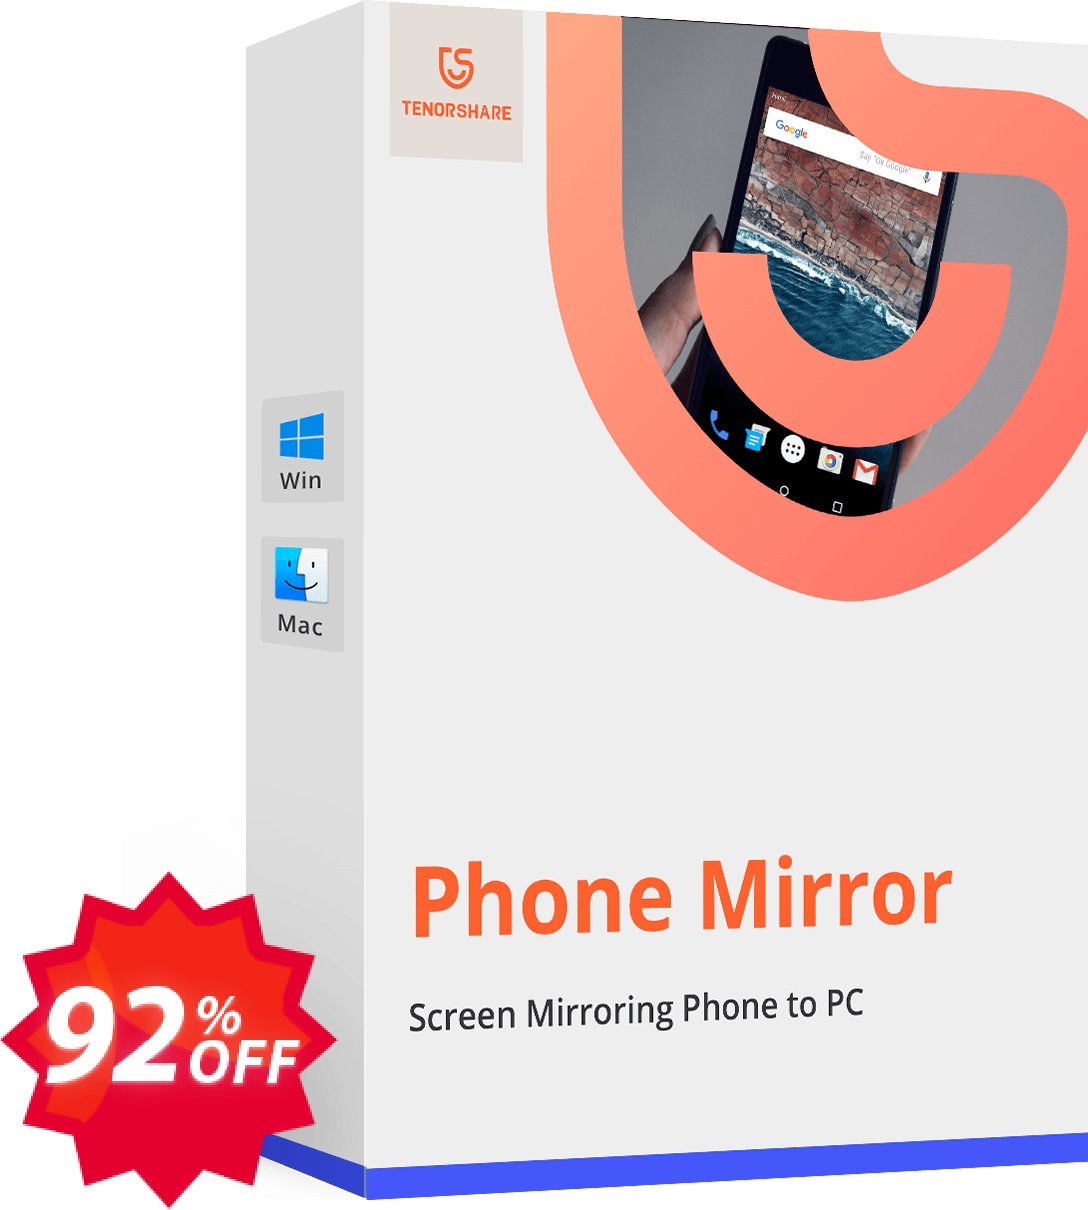 Tenorshare Phone Mirror for MAC Coupon code 92% discount 